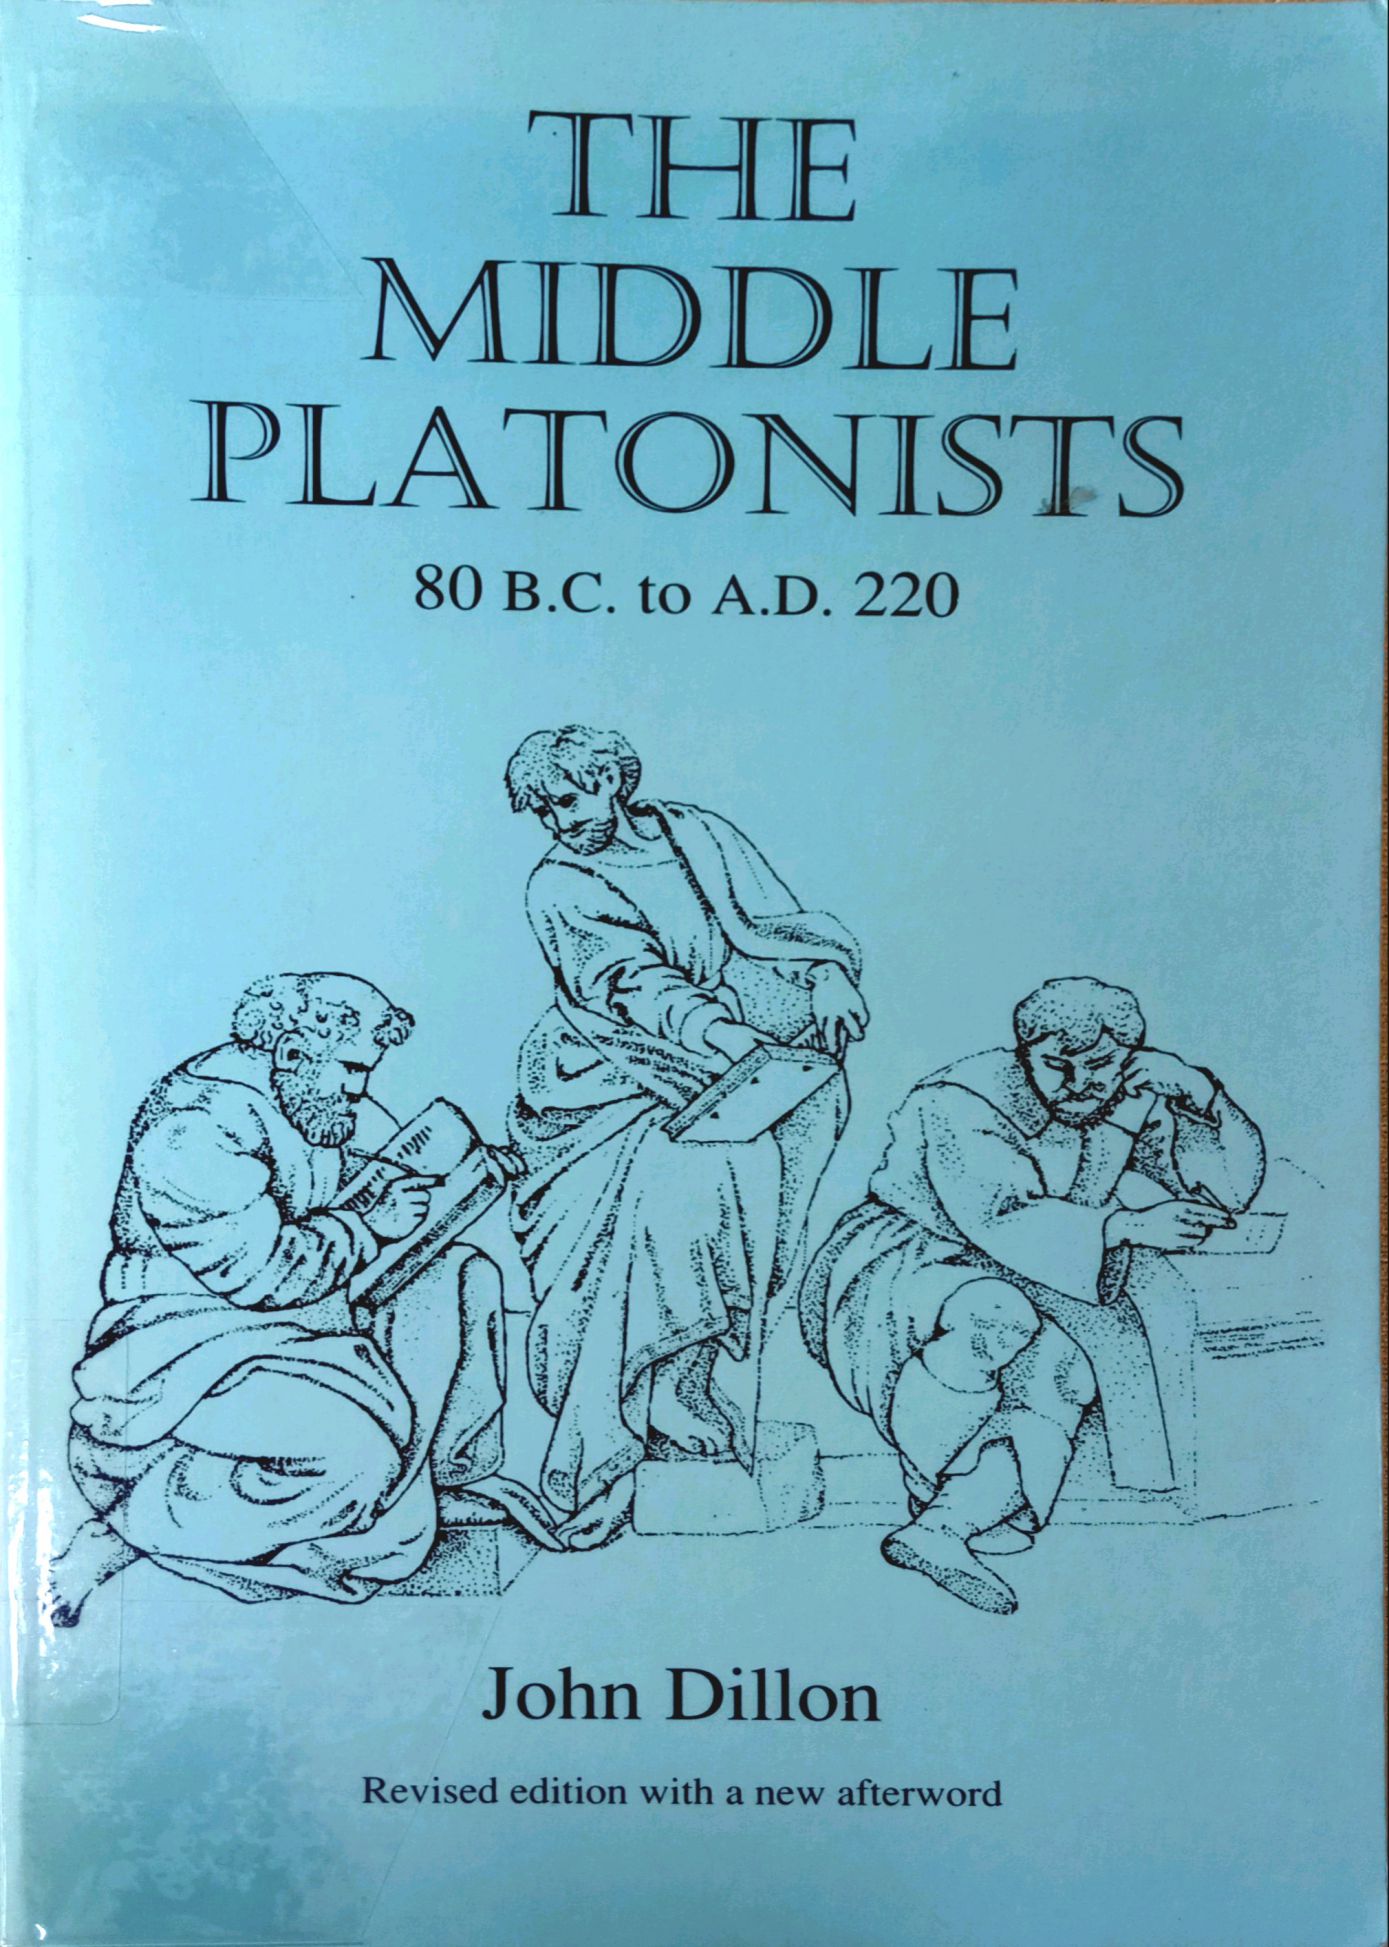 THE MIDDLE PLATONISTS: 80 B.C TO A.D. 220